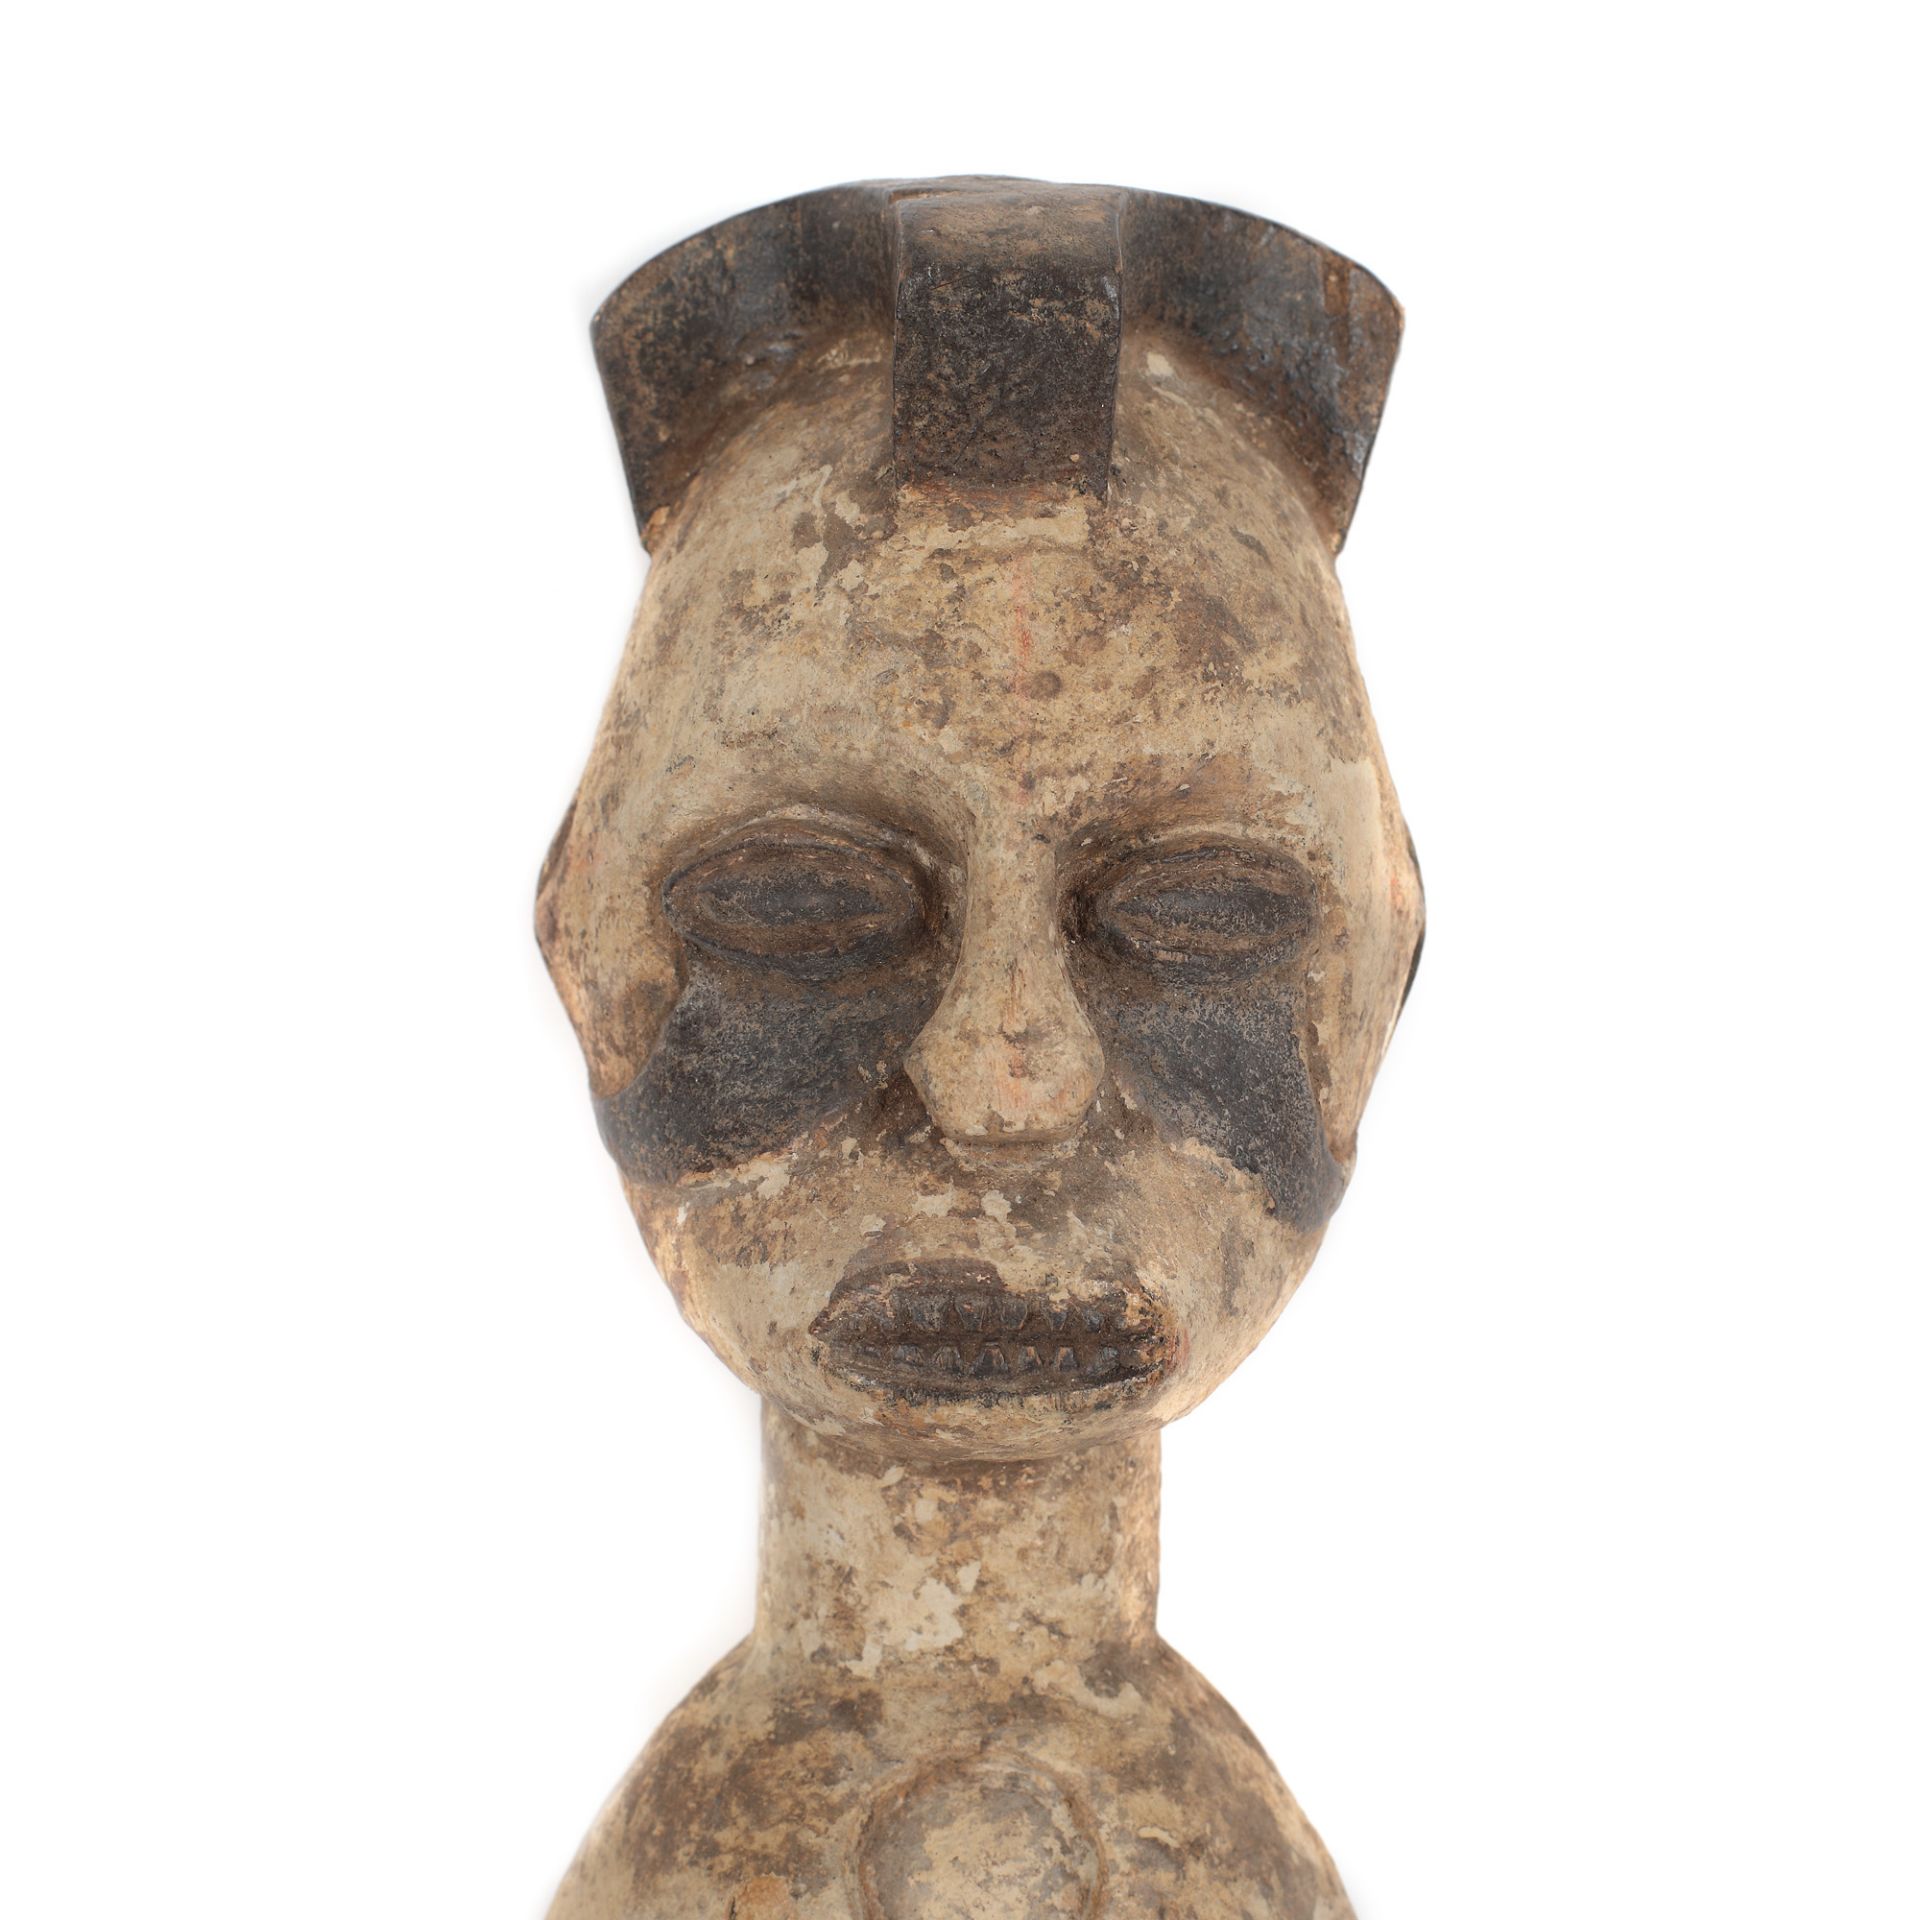 Bété African statuette, Ivory Coast, early 20th century - Image 3 of 3